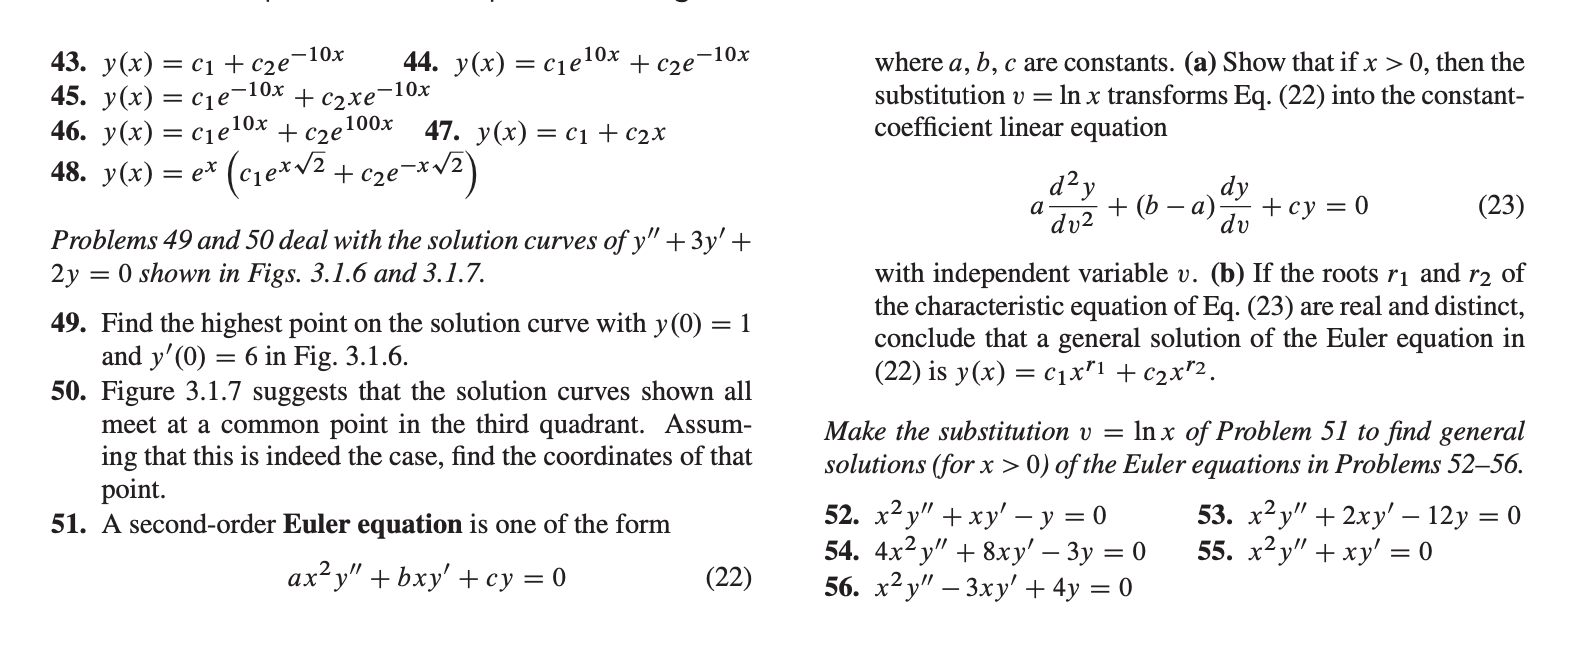 A second-order Euler equation is one of the form
